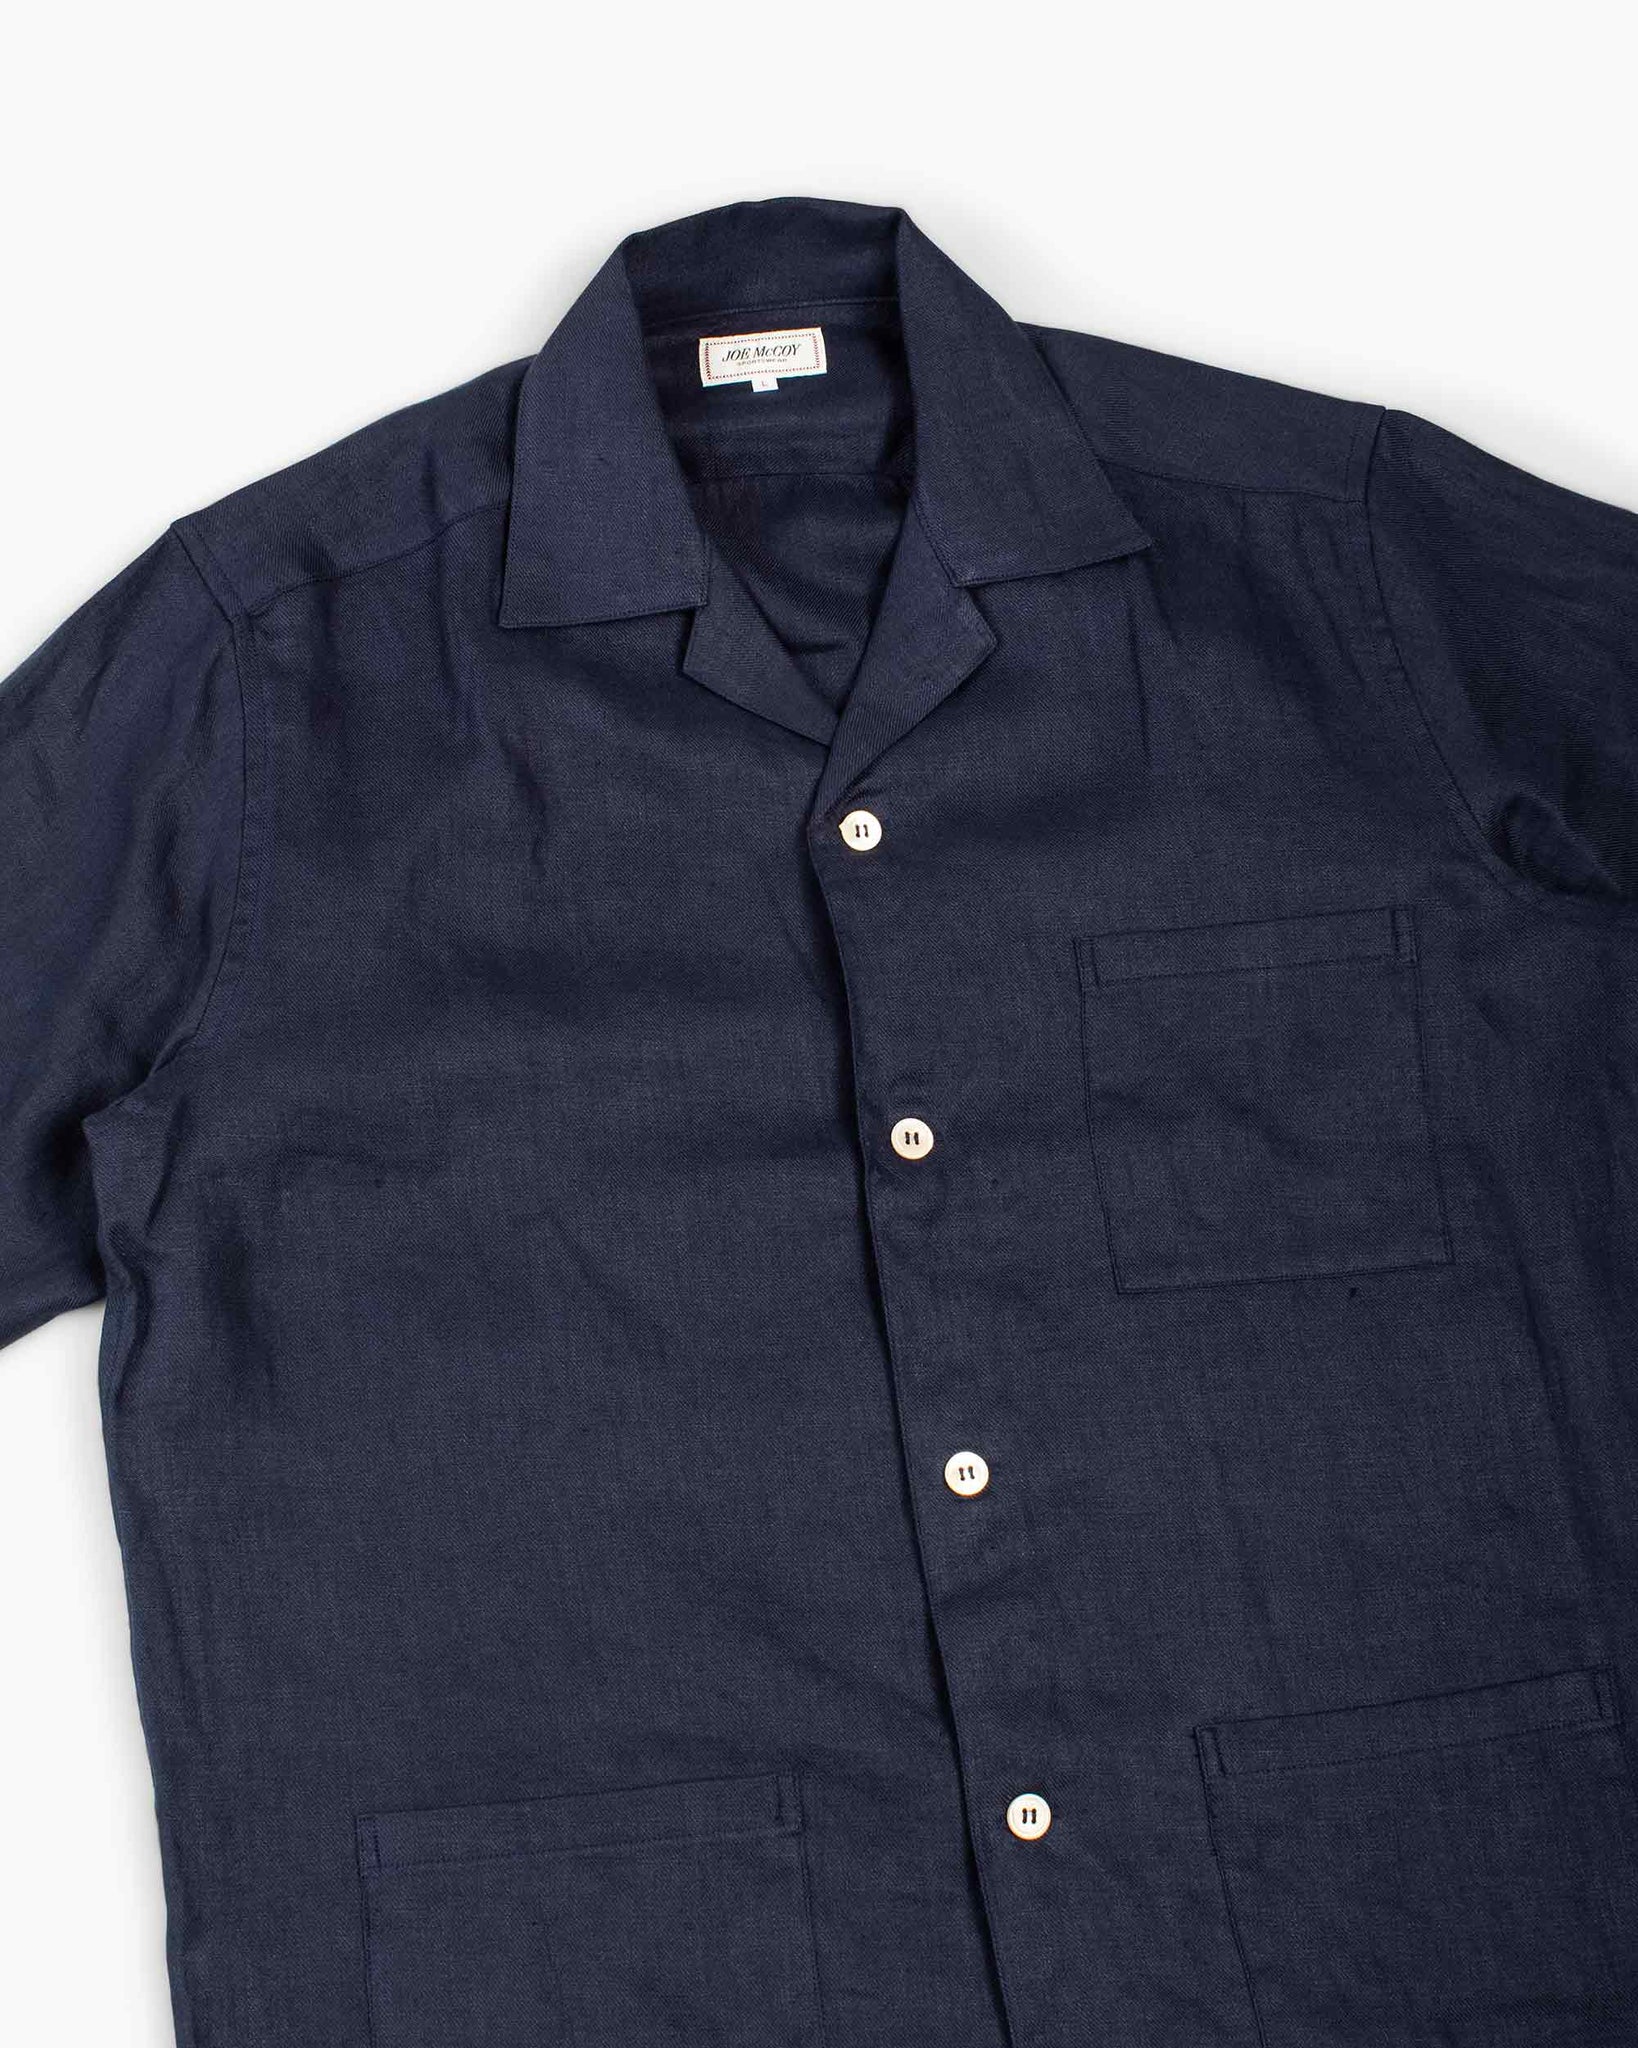 The Real McCoy's MS22010 Linen Open Collar Shirt Navy Details